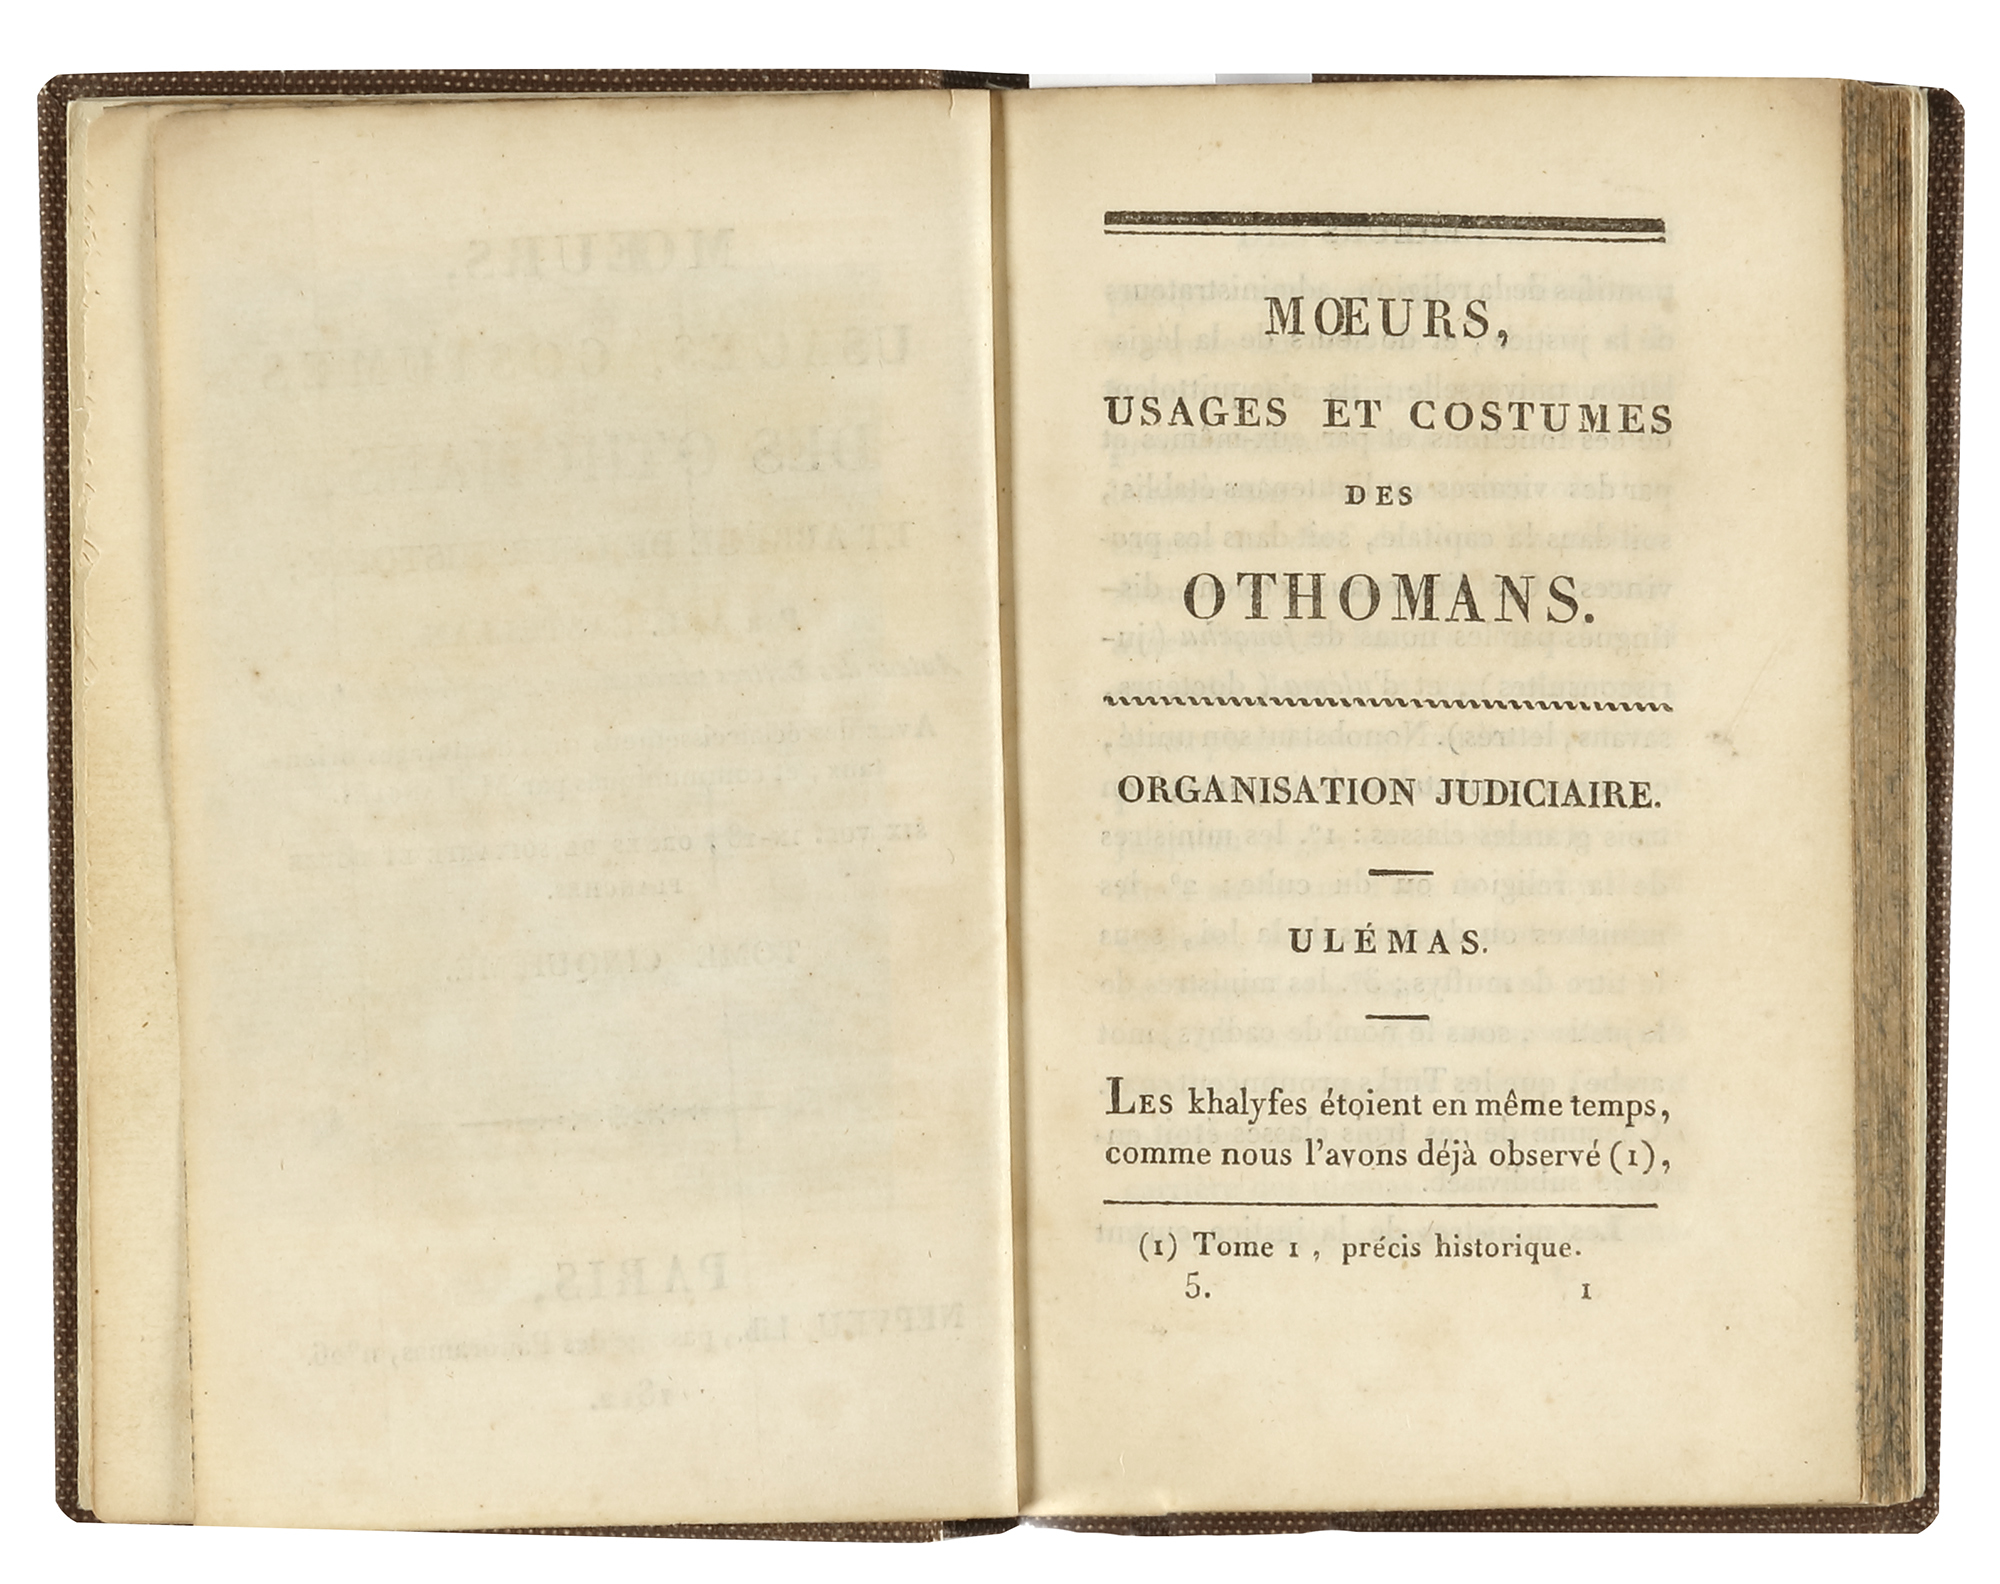 HISTORY OF THE OTTOMAN MANNERS AND CUSTOMS, PARIS AND DATED 1812 - Image 2 of 6